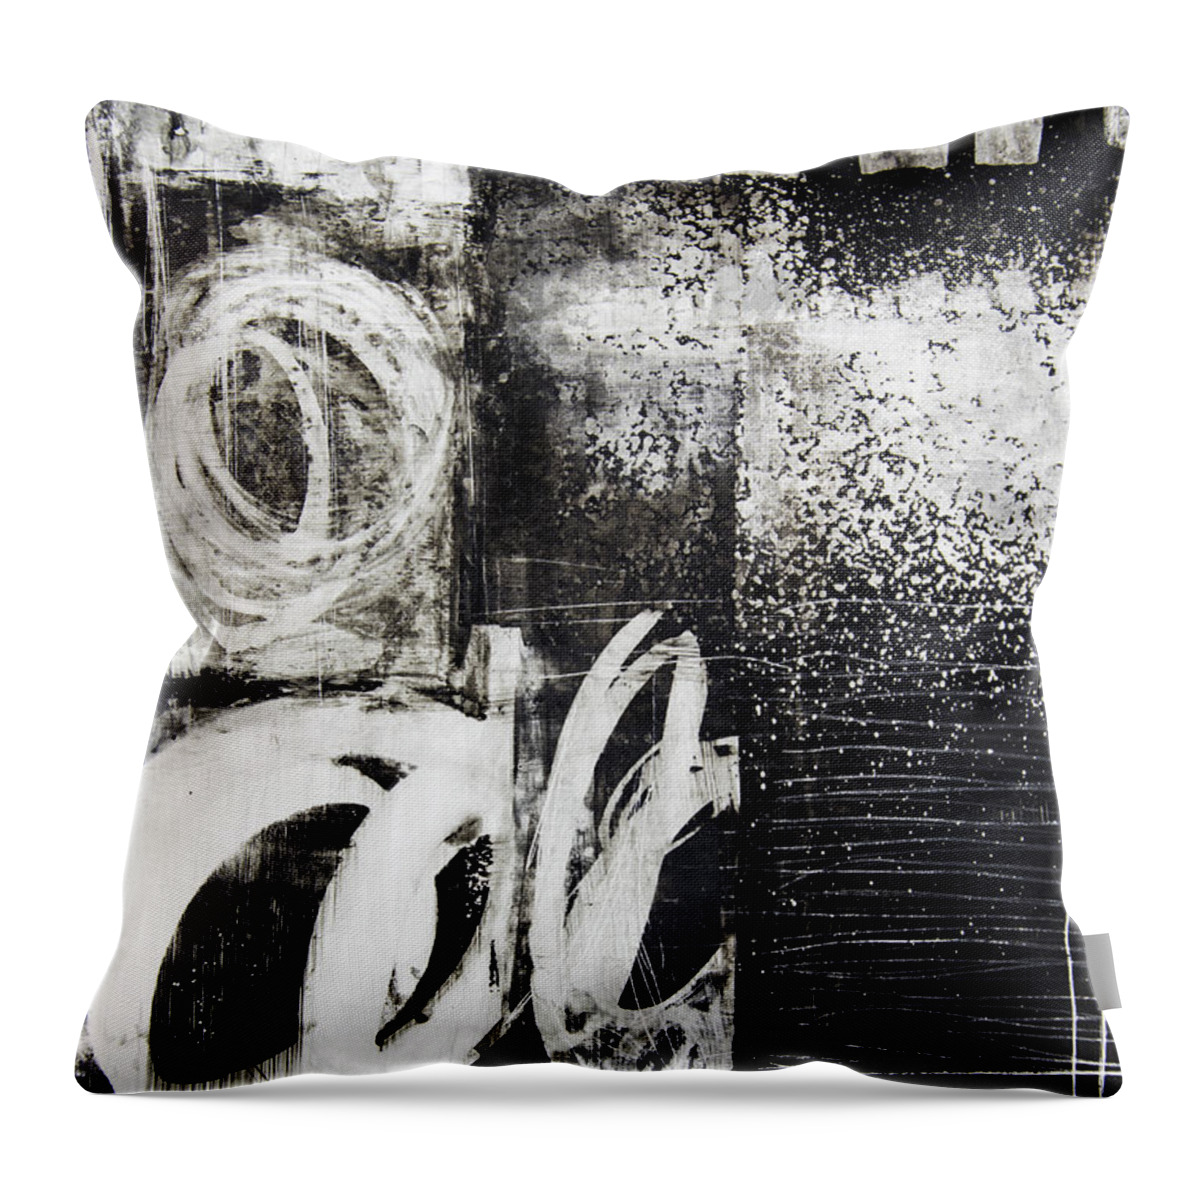 Yupo Throw Pillow featuring the painting Yupo 1 by Elena Nosyreva